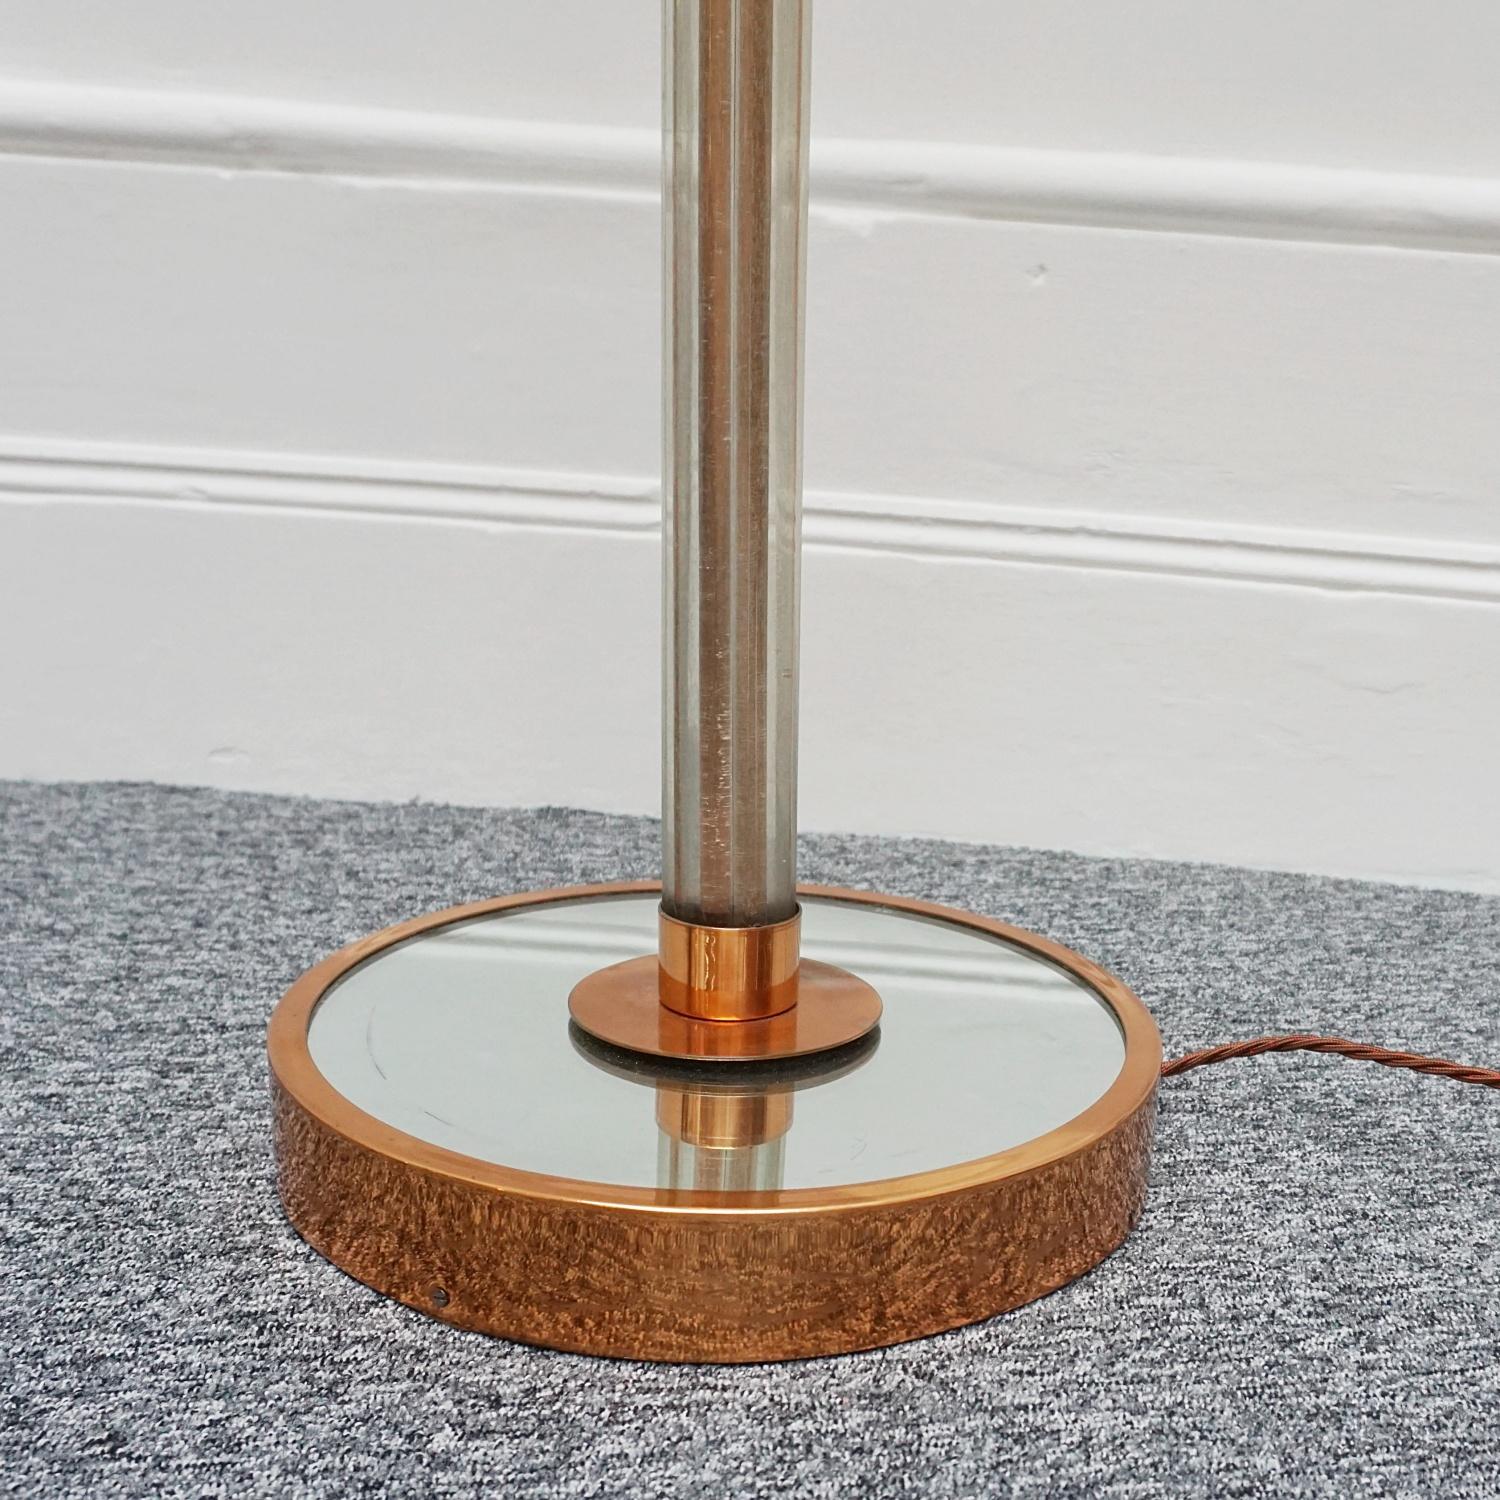 20th Century Mid-Century Uplighter Attributed to Heal's of London For Sale